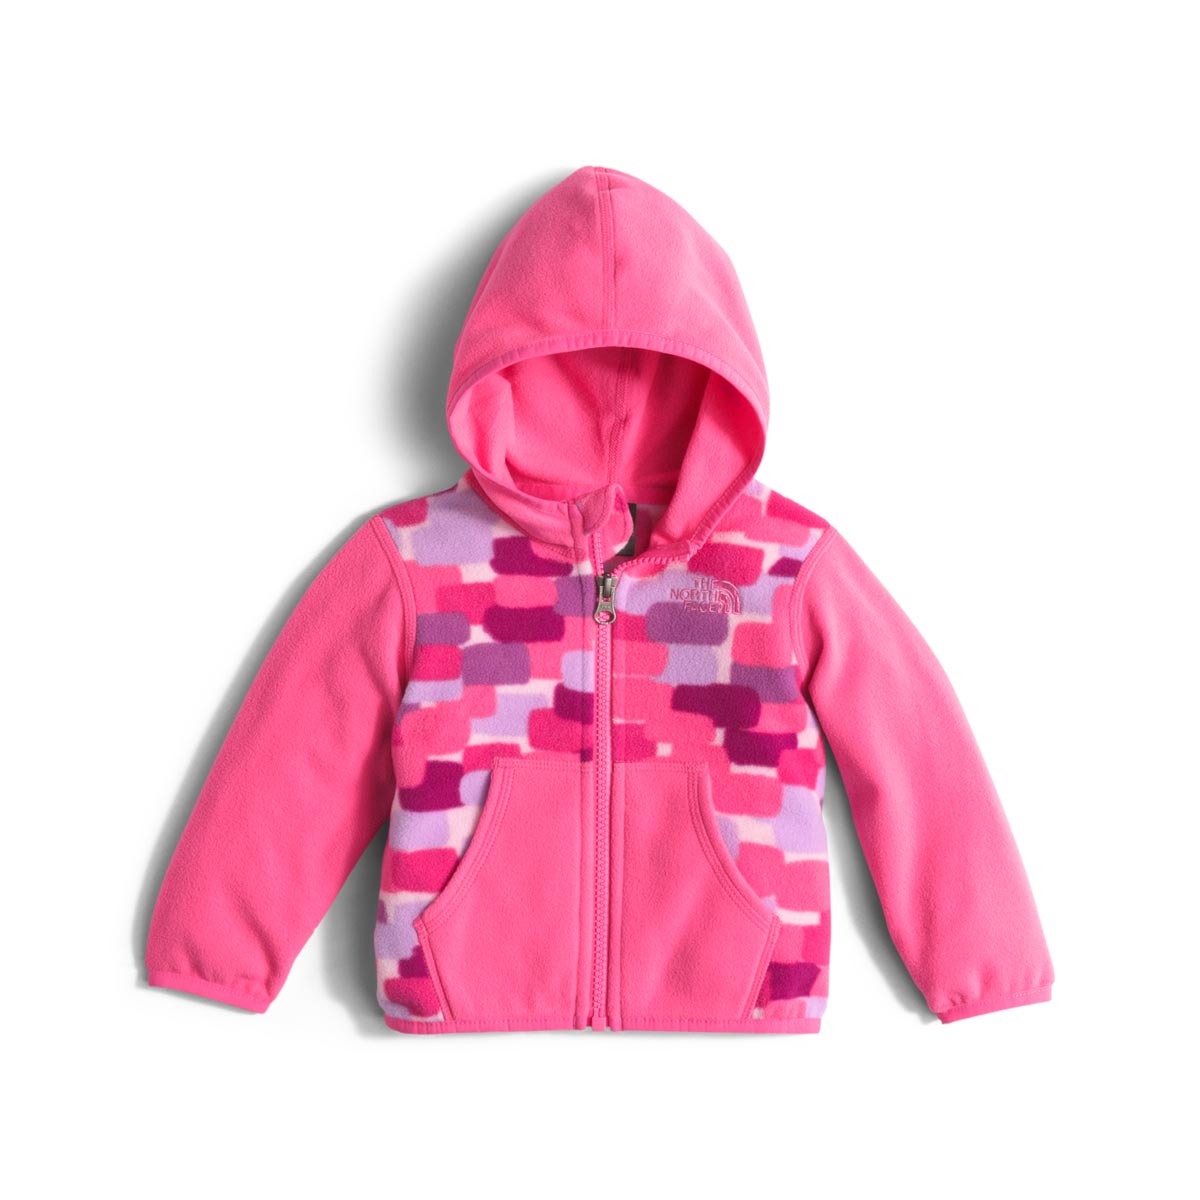 The North Face Infants' Glacier Full Zip Hoodie Discontinued Pricing